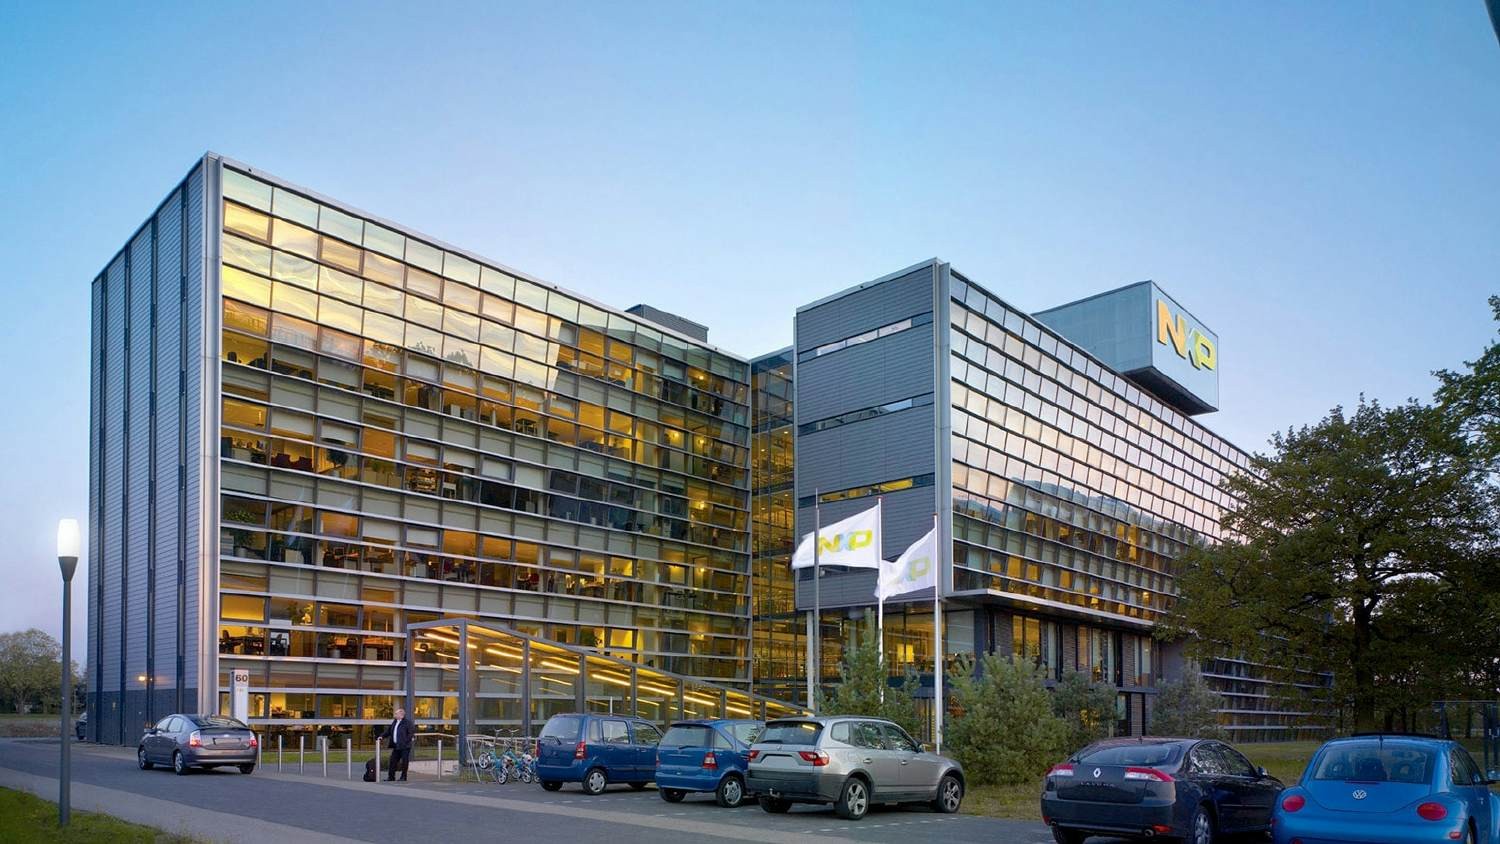 NXP Global Headquarters located in Eindhoven, Netherlands.